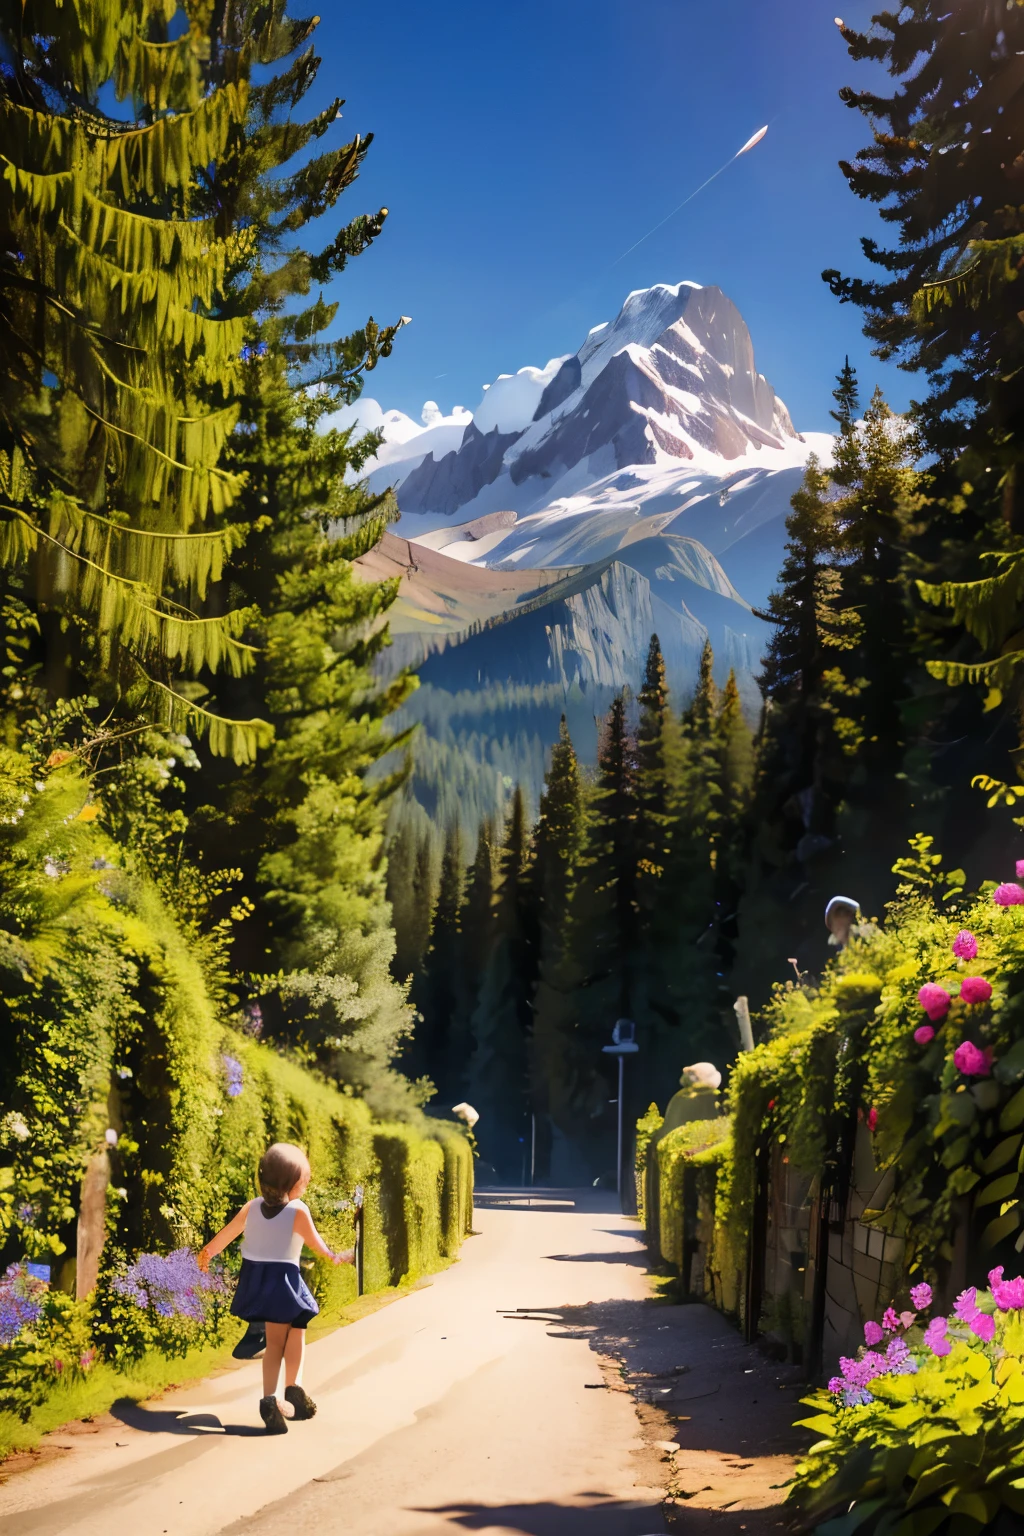 Mountain path, fir trees, birch trees, children playing, flowers, butterflies, flying birds, landscape, birds chirping, sunlight filtering through the trees, soft breeze, lush green foliage, sparkling water reflections, vibrant wildflowers, joyful laughter, carefree children's expressions, dynamic brushstrokes, mountain, harmonious composition.